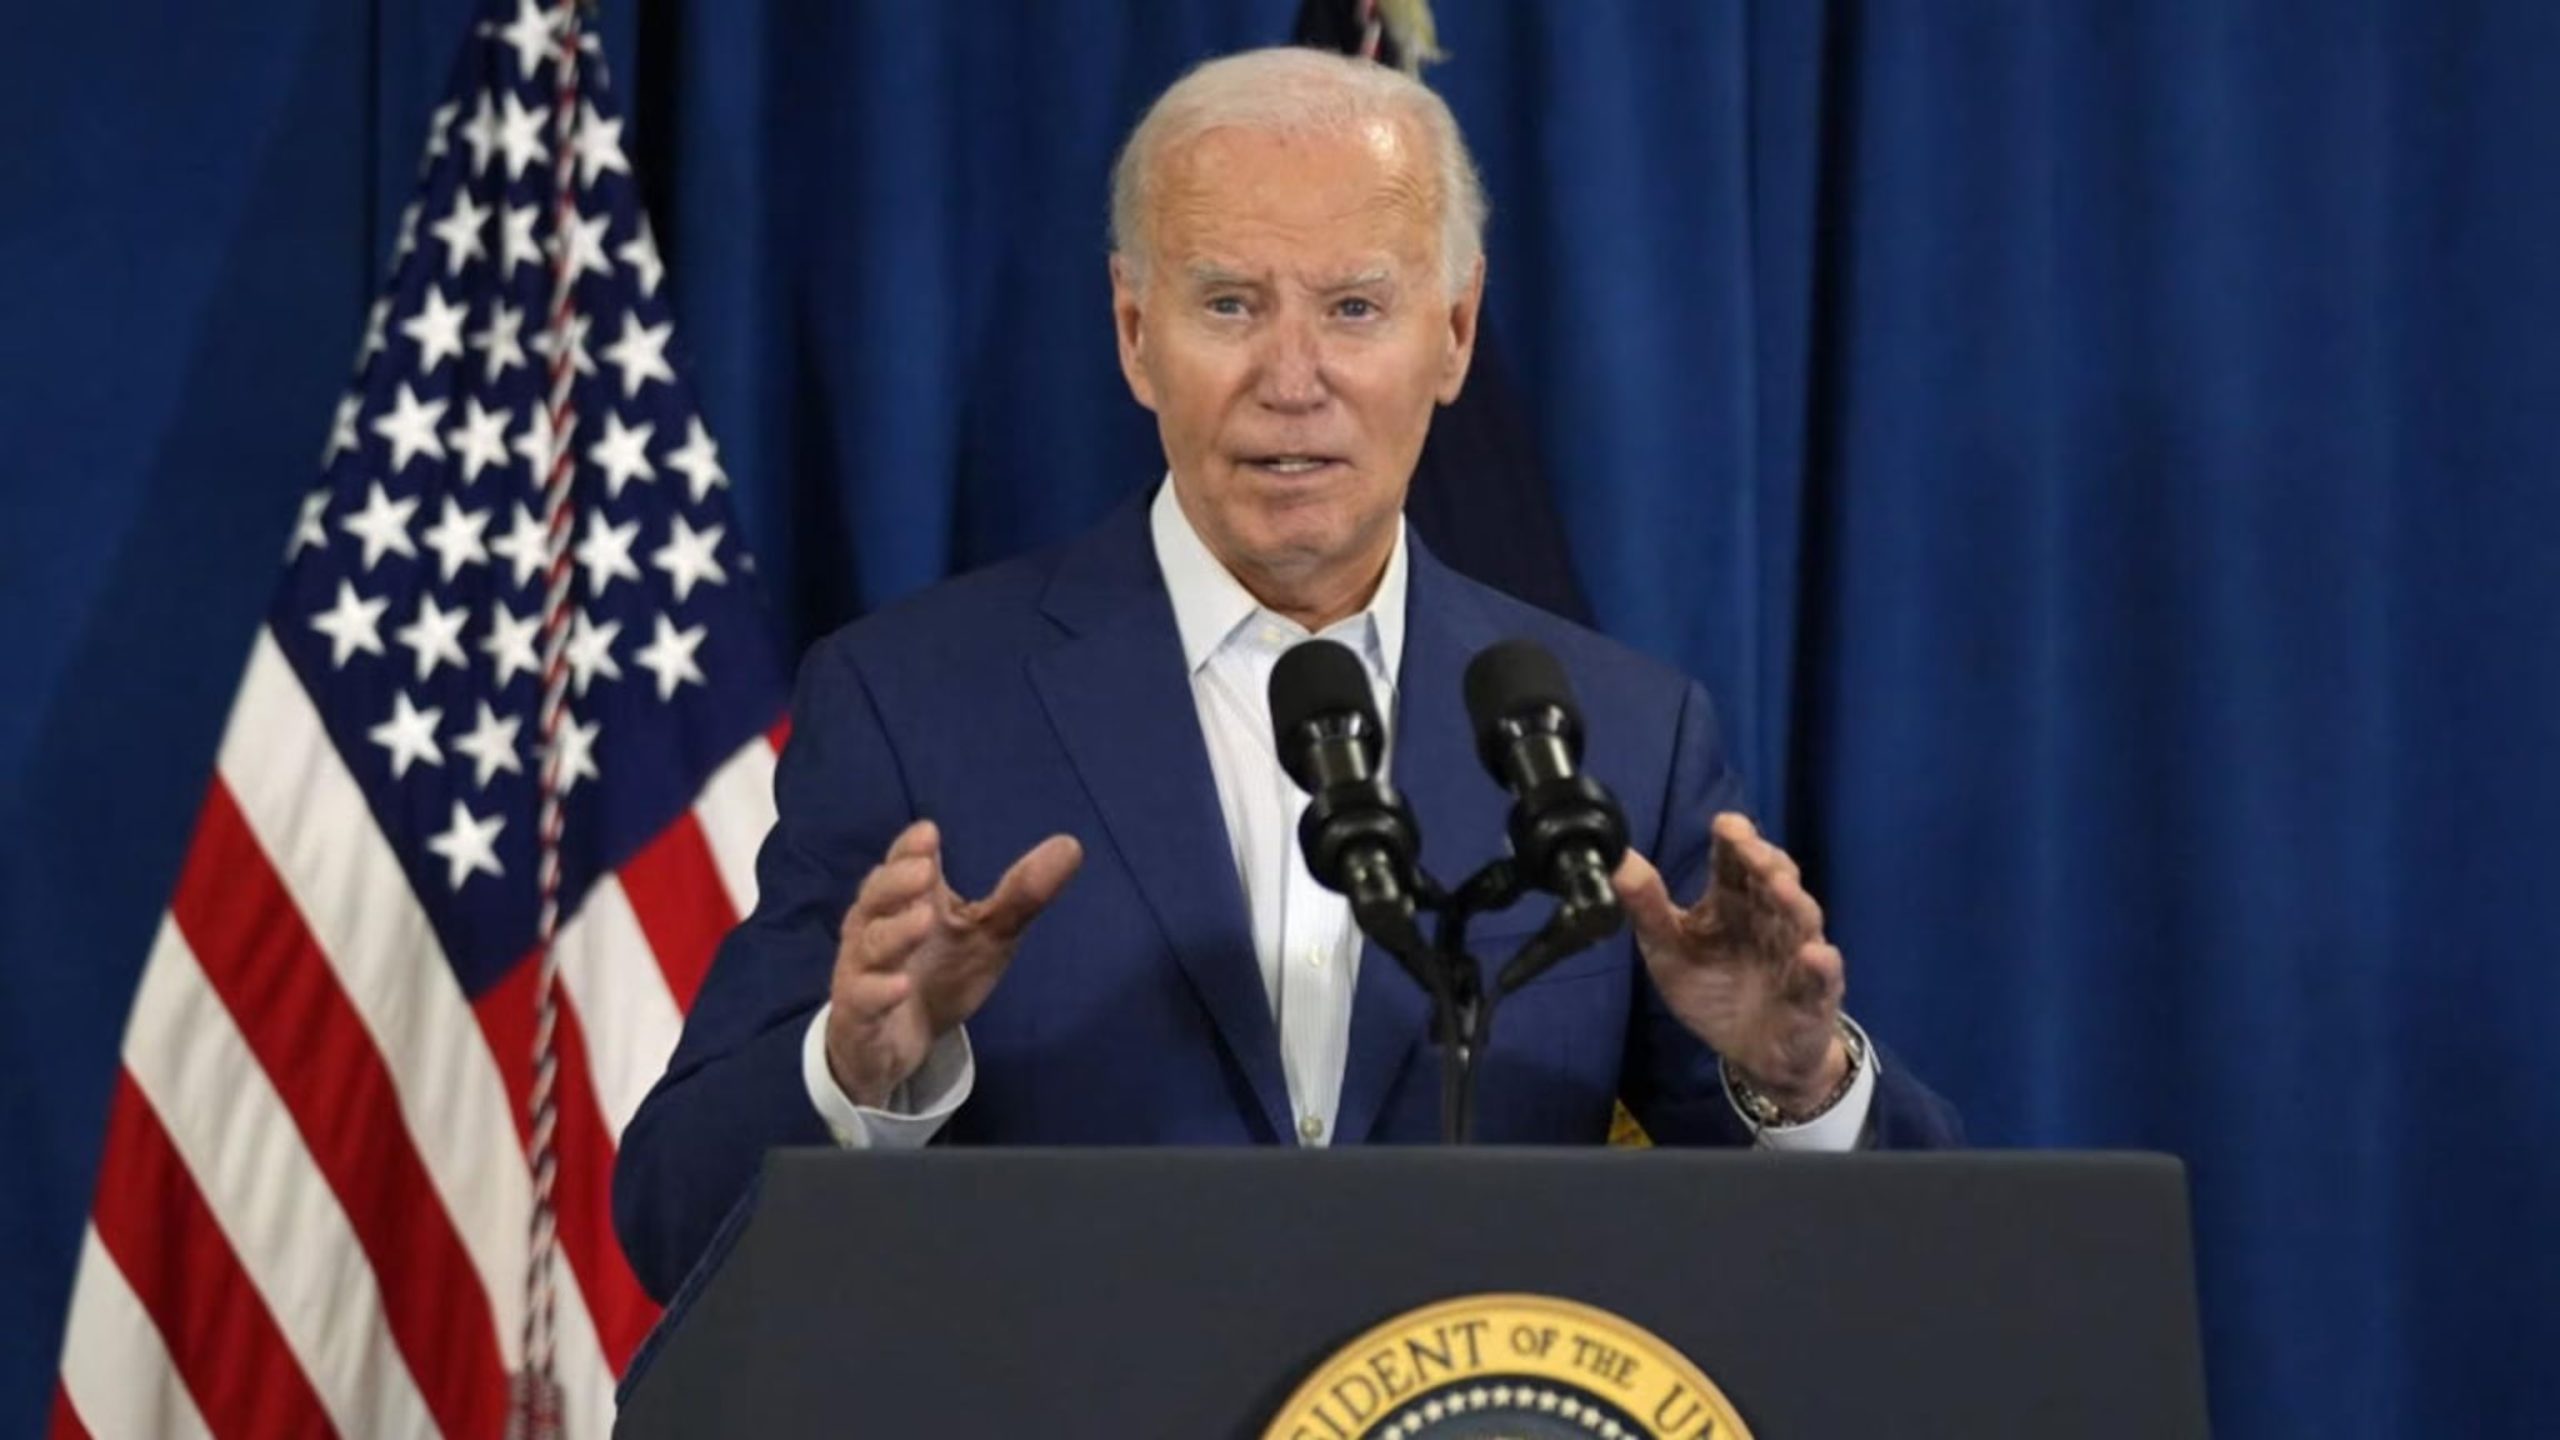 Biden's Campaign in Crisis: Allies Brace for Potential Withdrawal Ahead of 2024 Election - Adela Journal - News from around the World